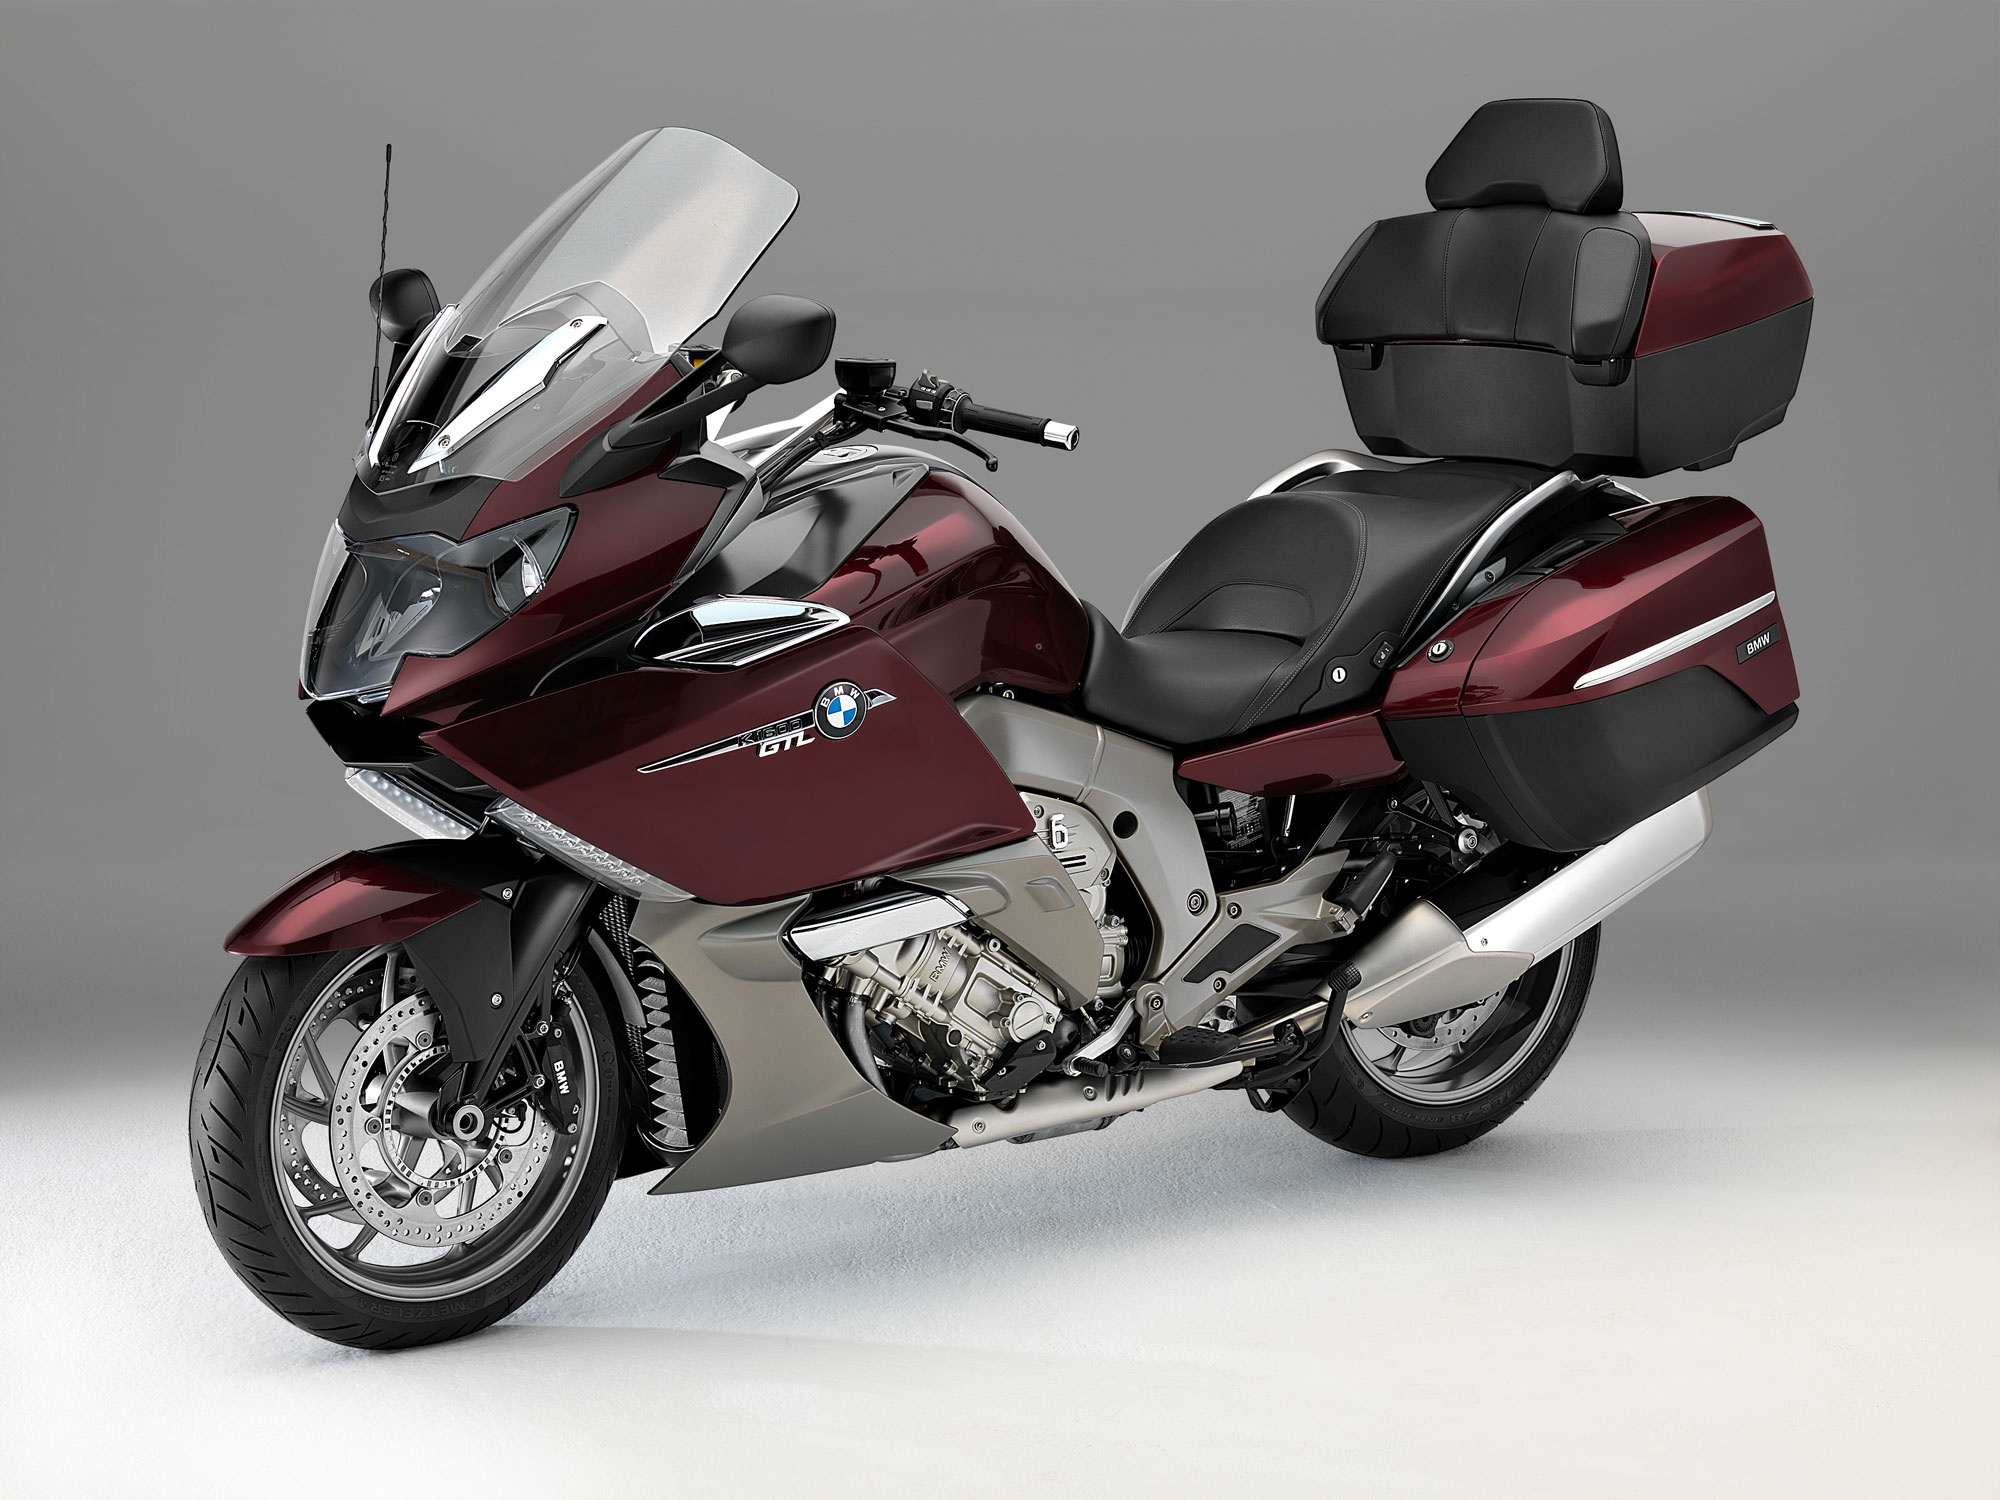 BMW K 1600 GTL (Auto), HD wallpapers and backgrounds, High-end touring bike, Remarkable performance, 2000x1500 HD Desktop